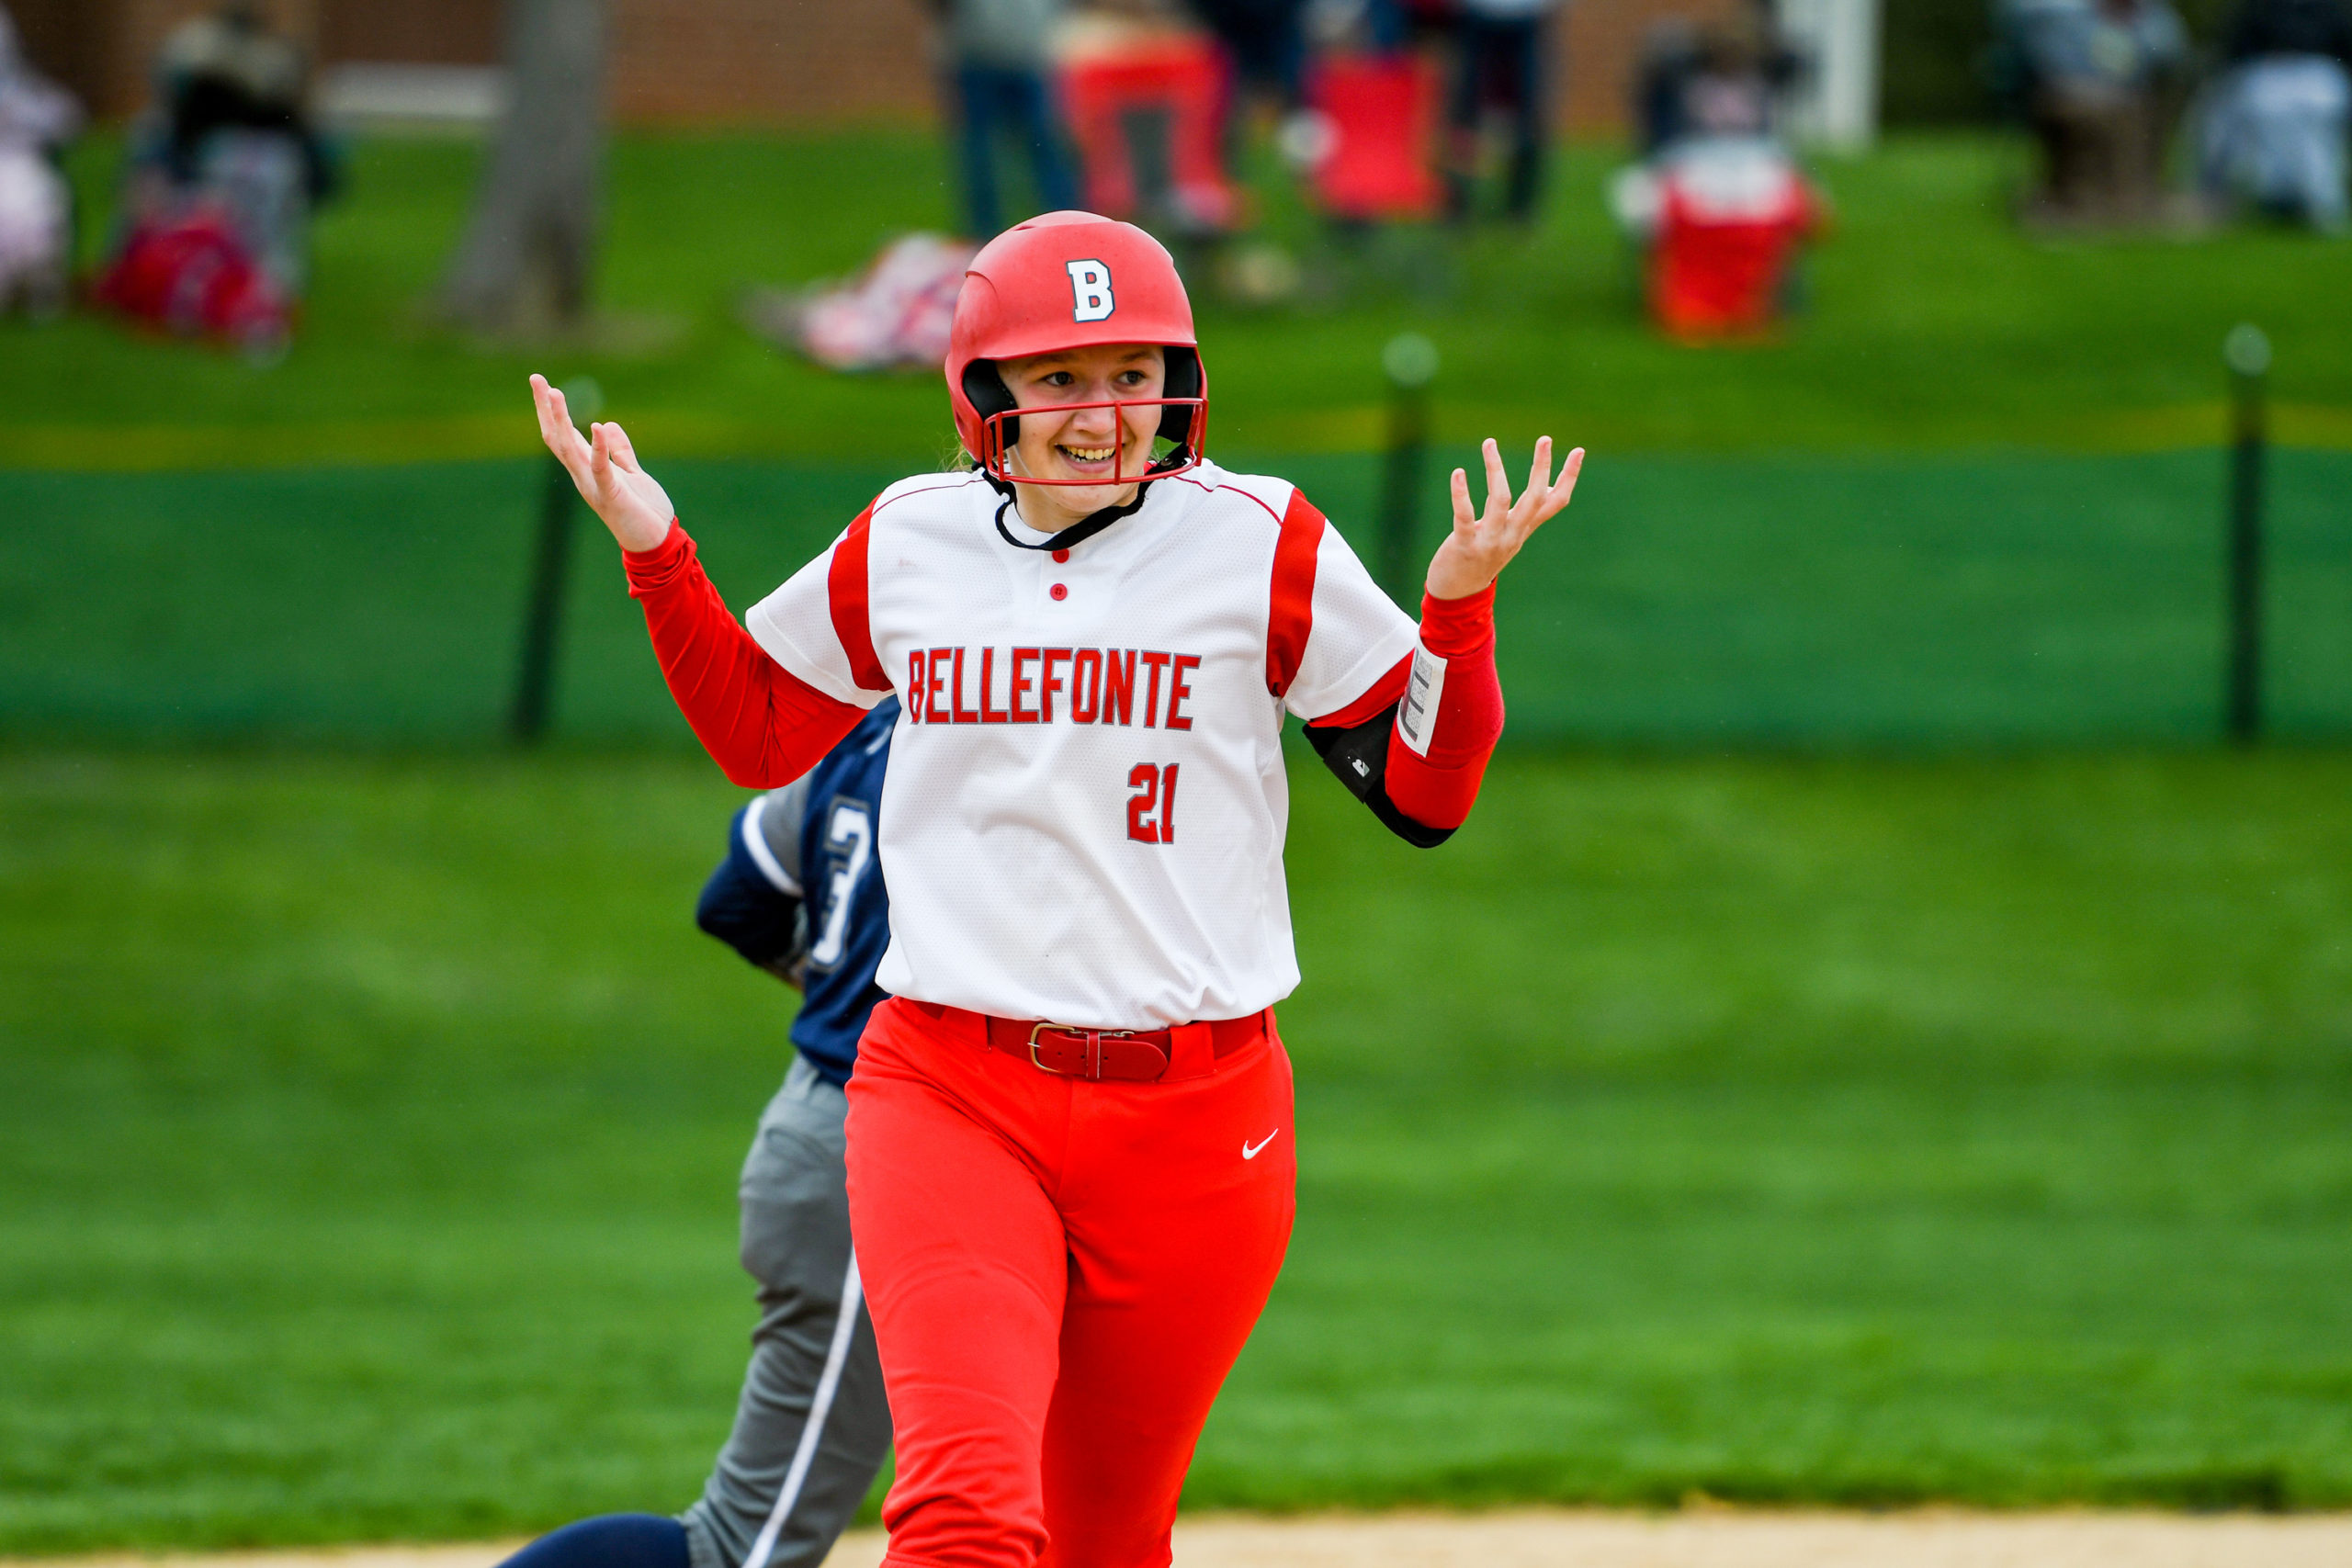 Pitching and defense driving Bellefonte girls | Centre County Gazette